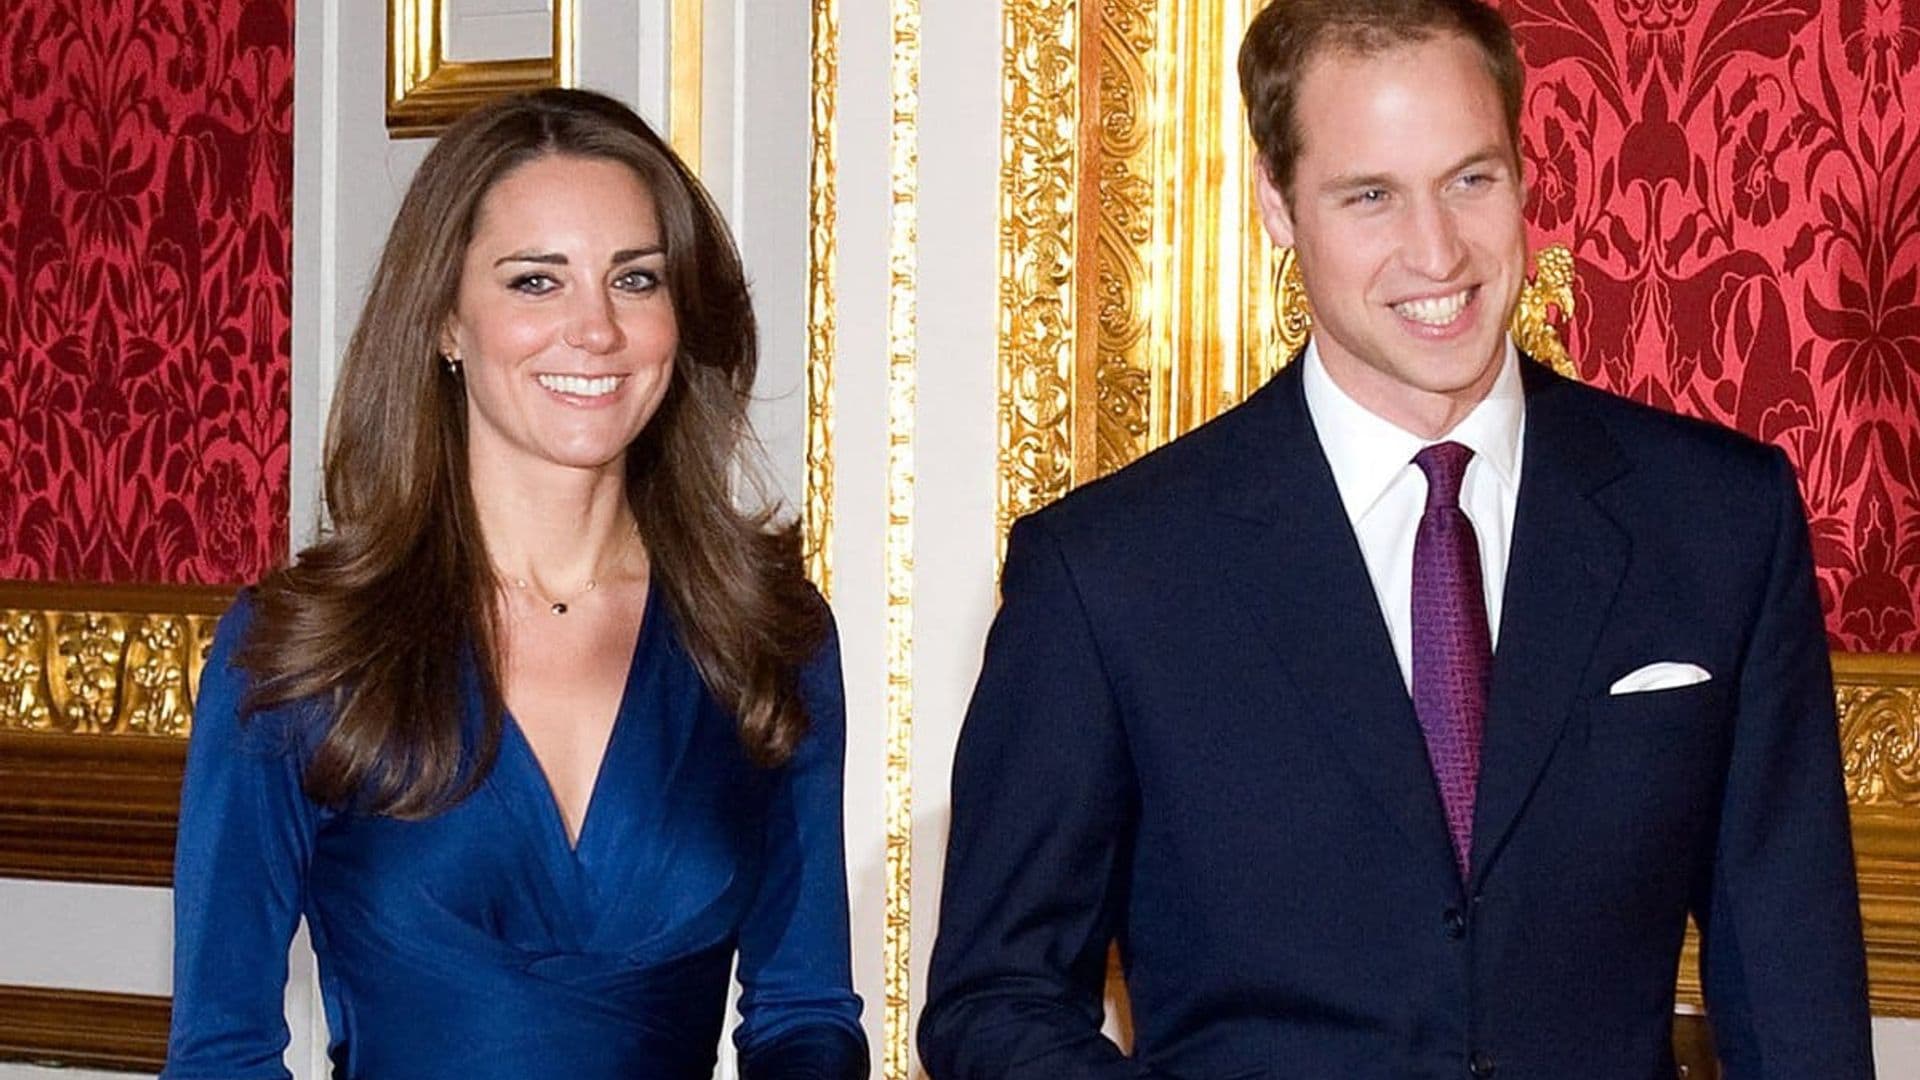 Nov. 16 is a special anniversary for Kate Middleton and Prince William